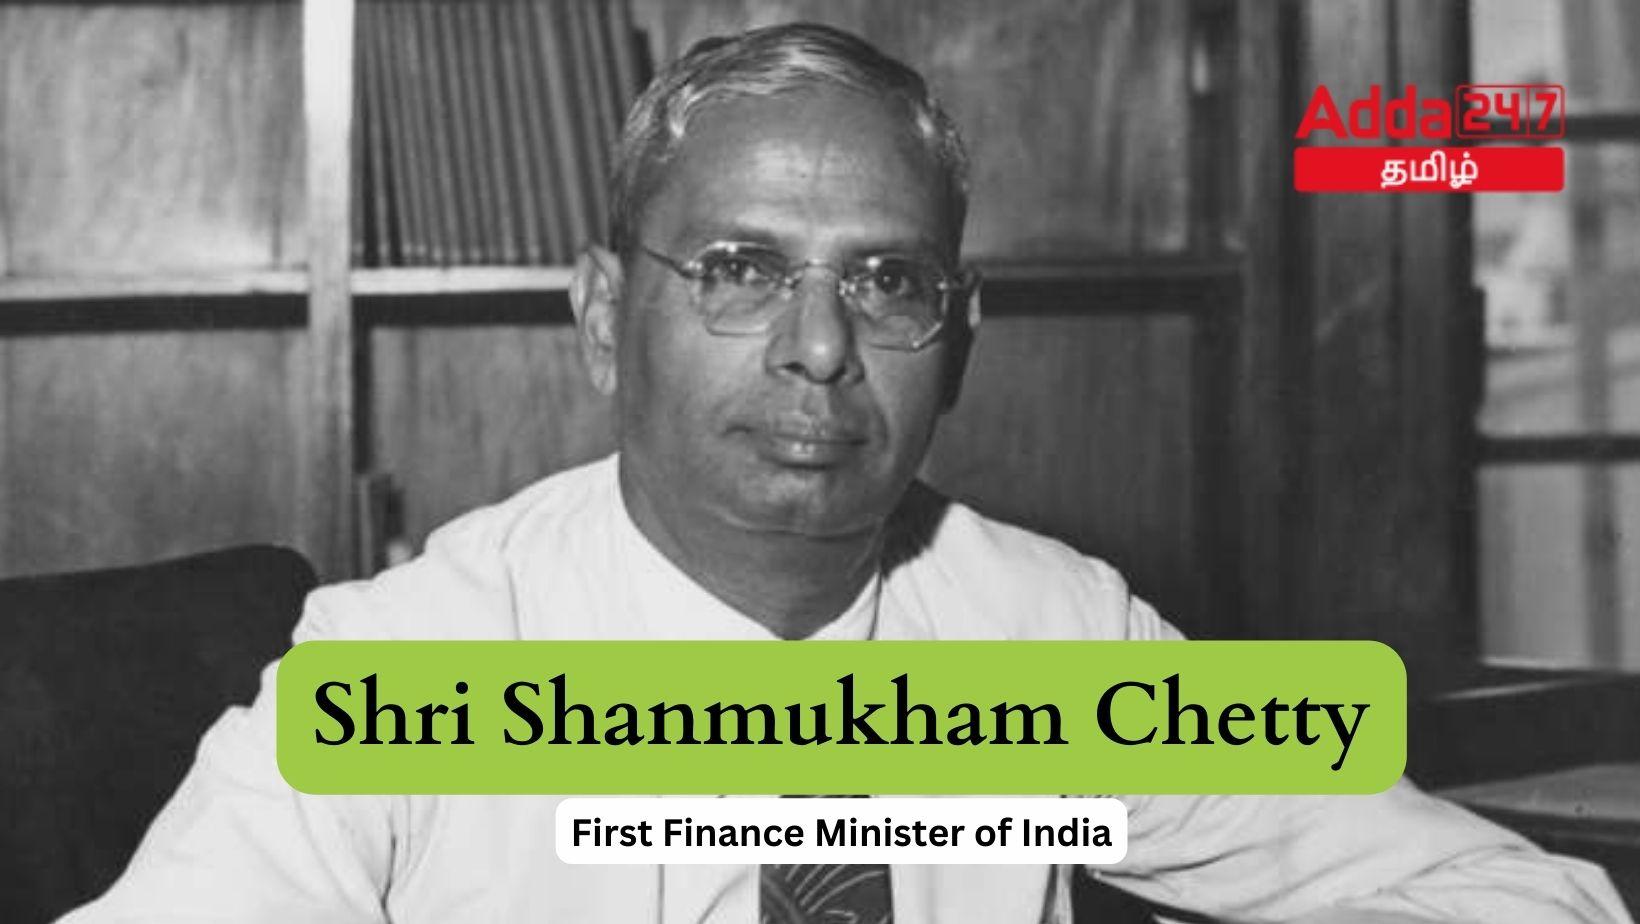 First Finance Minister of India